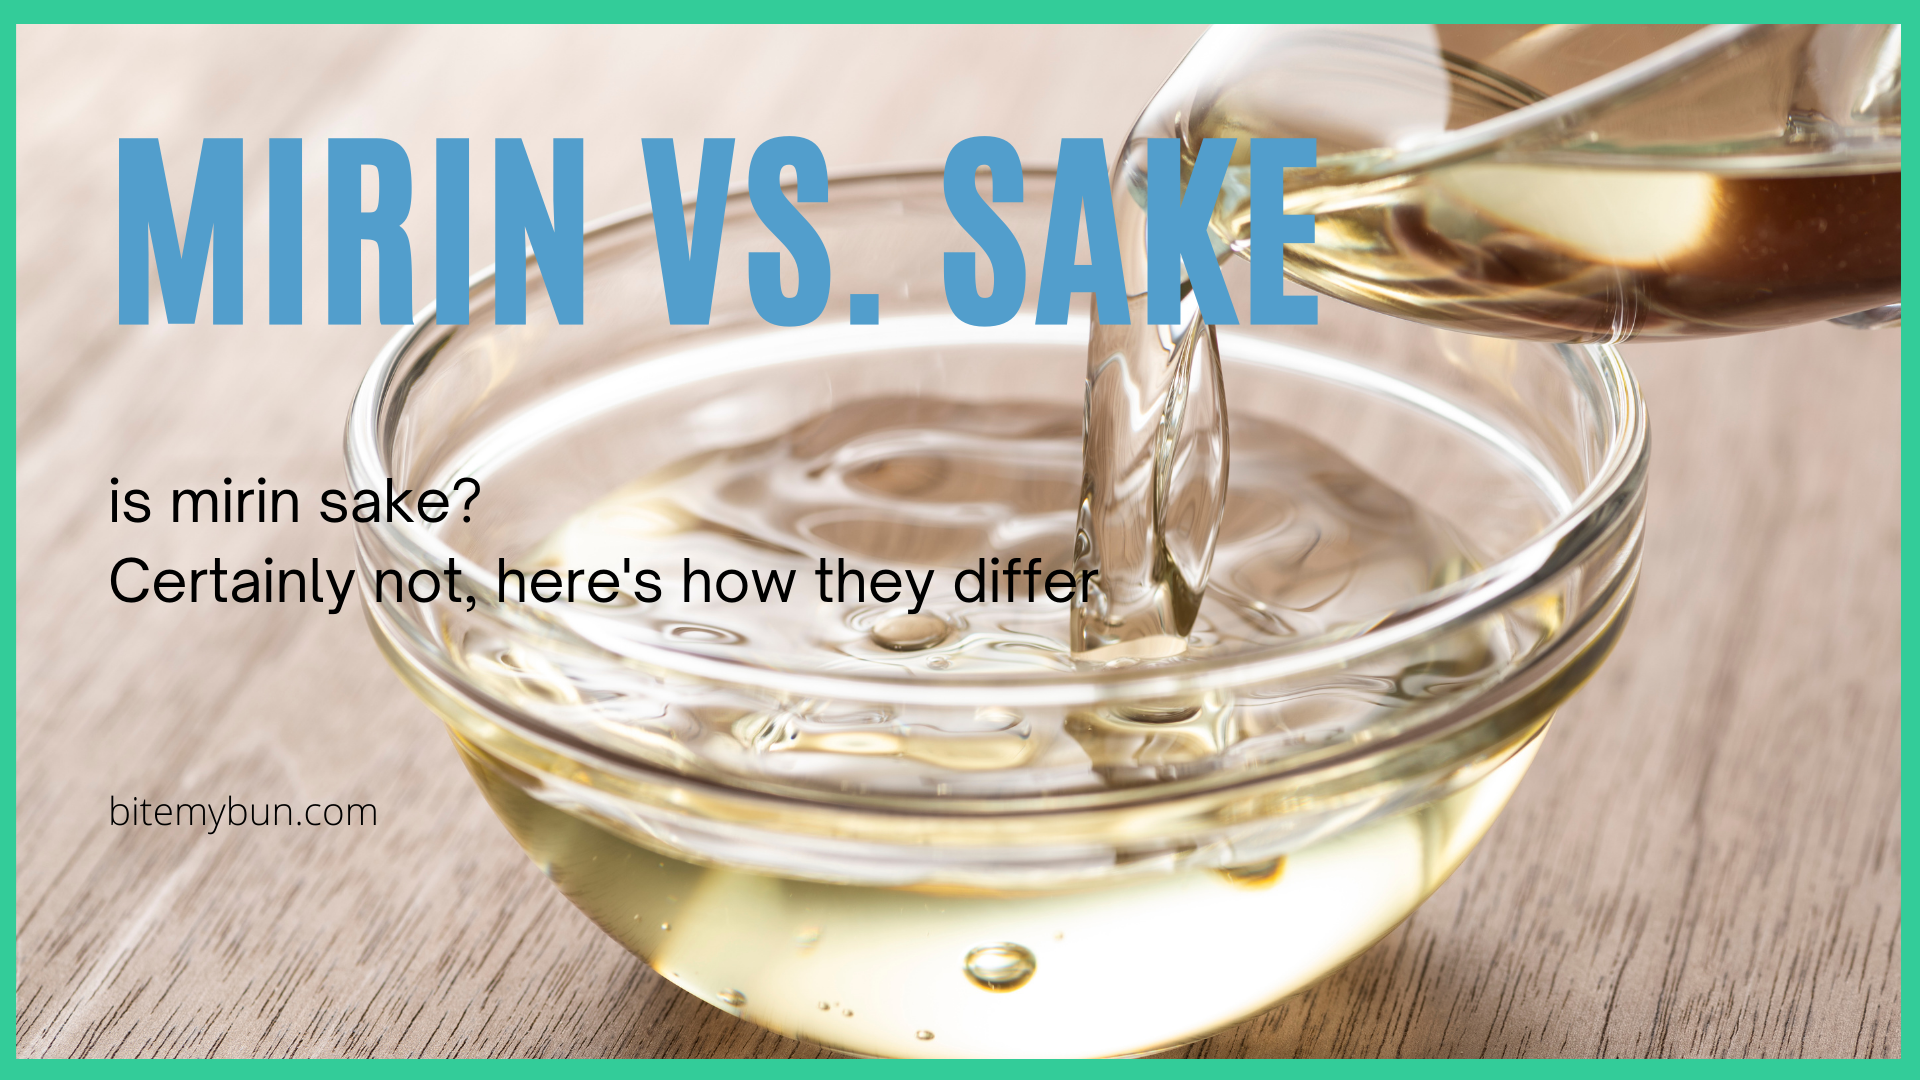 Mirin vs. sake- is mirin sake? Certainly not, here's how they differ